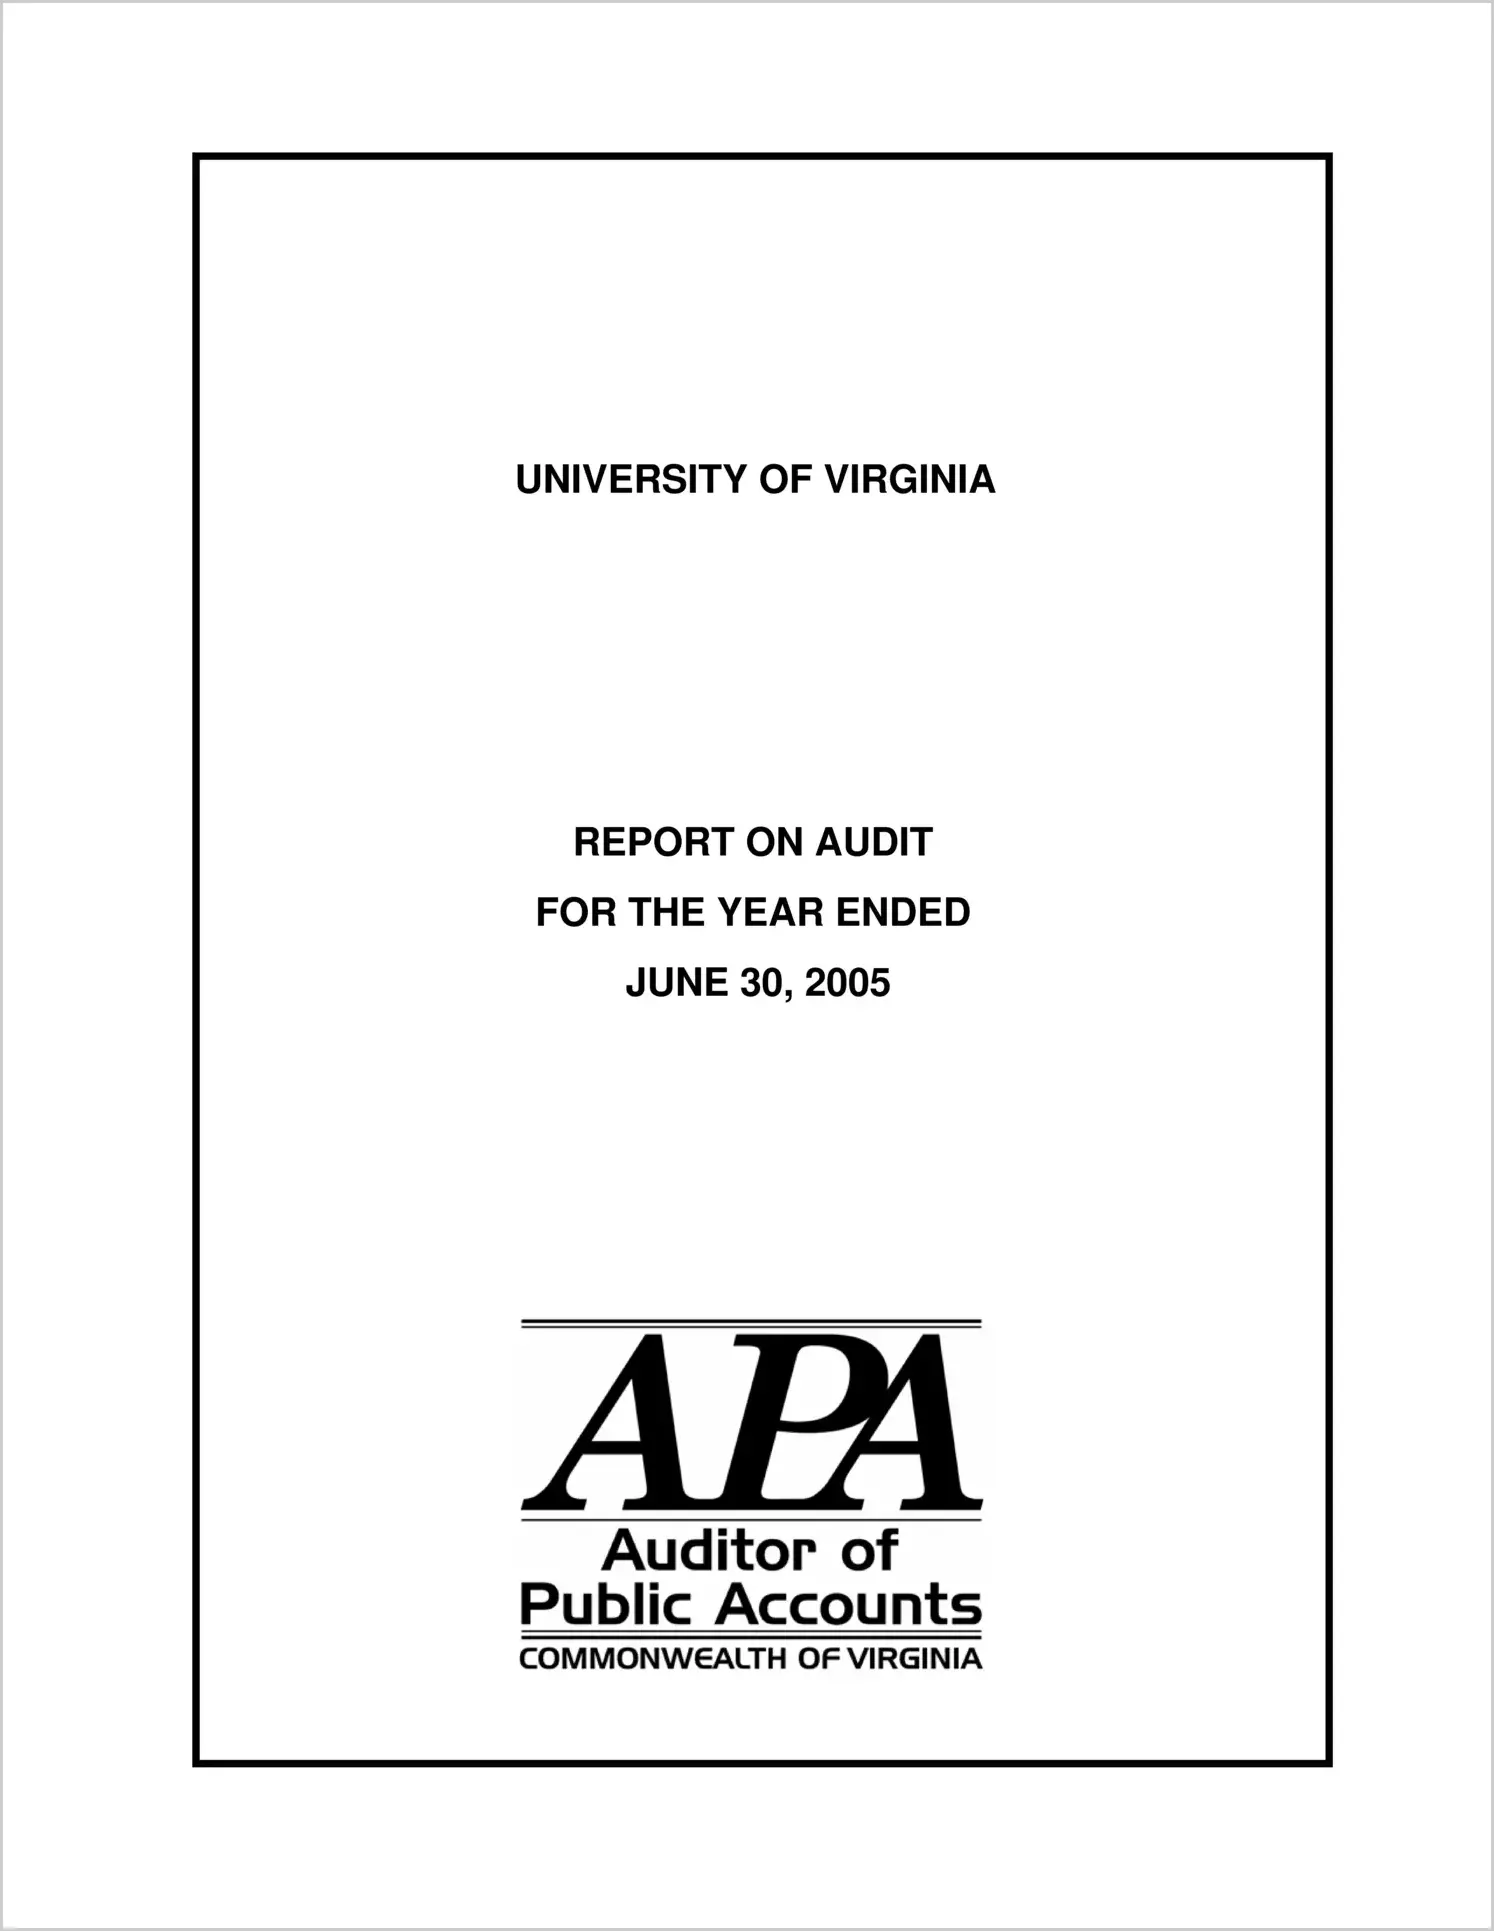 University of Virginia for the year ended June 30, 2005